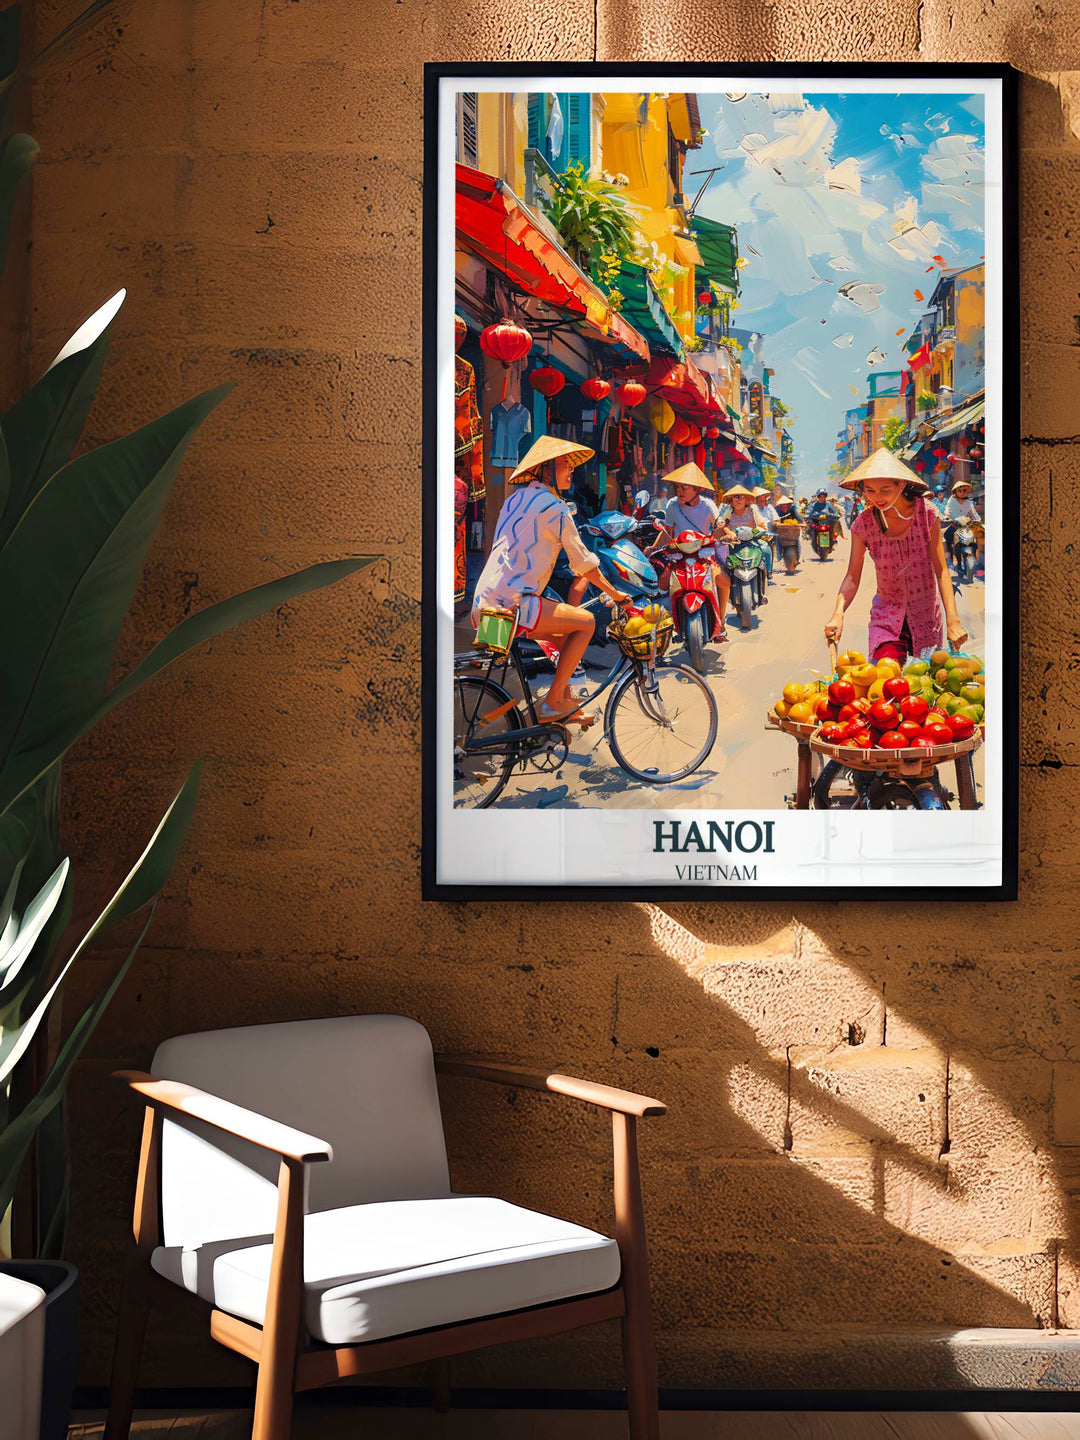 Wall art capturing the heart and soul of Hanoi, designed to transport viewers to the lively streets and rich culture of Vietnam.